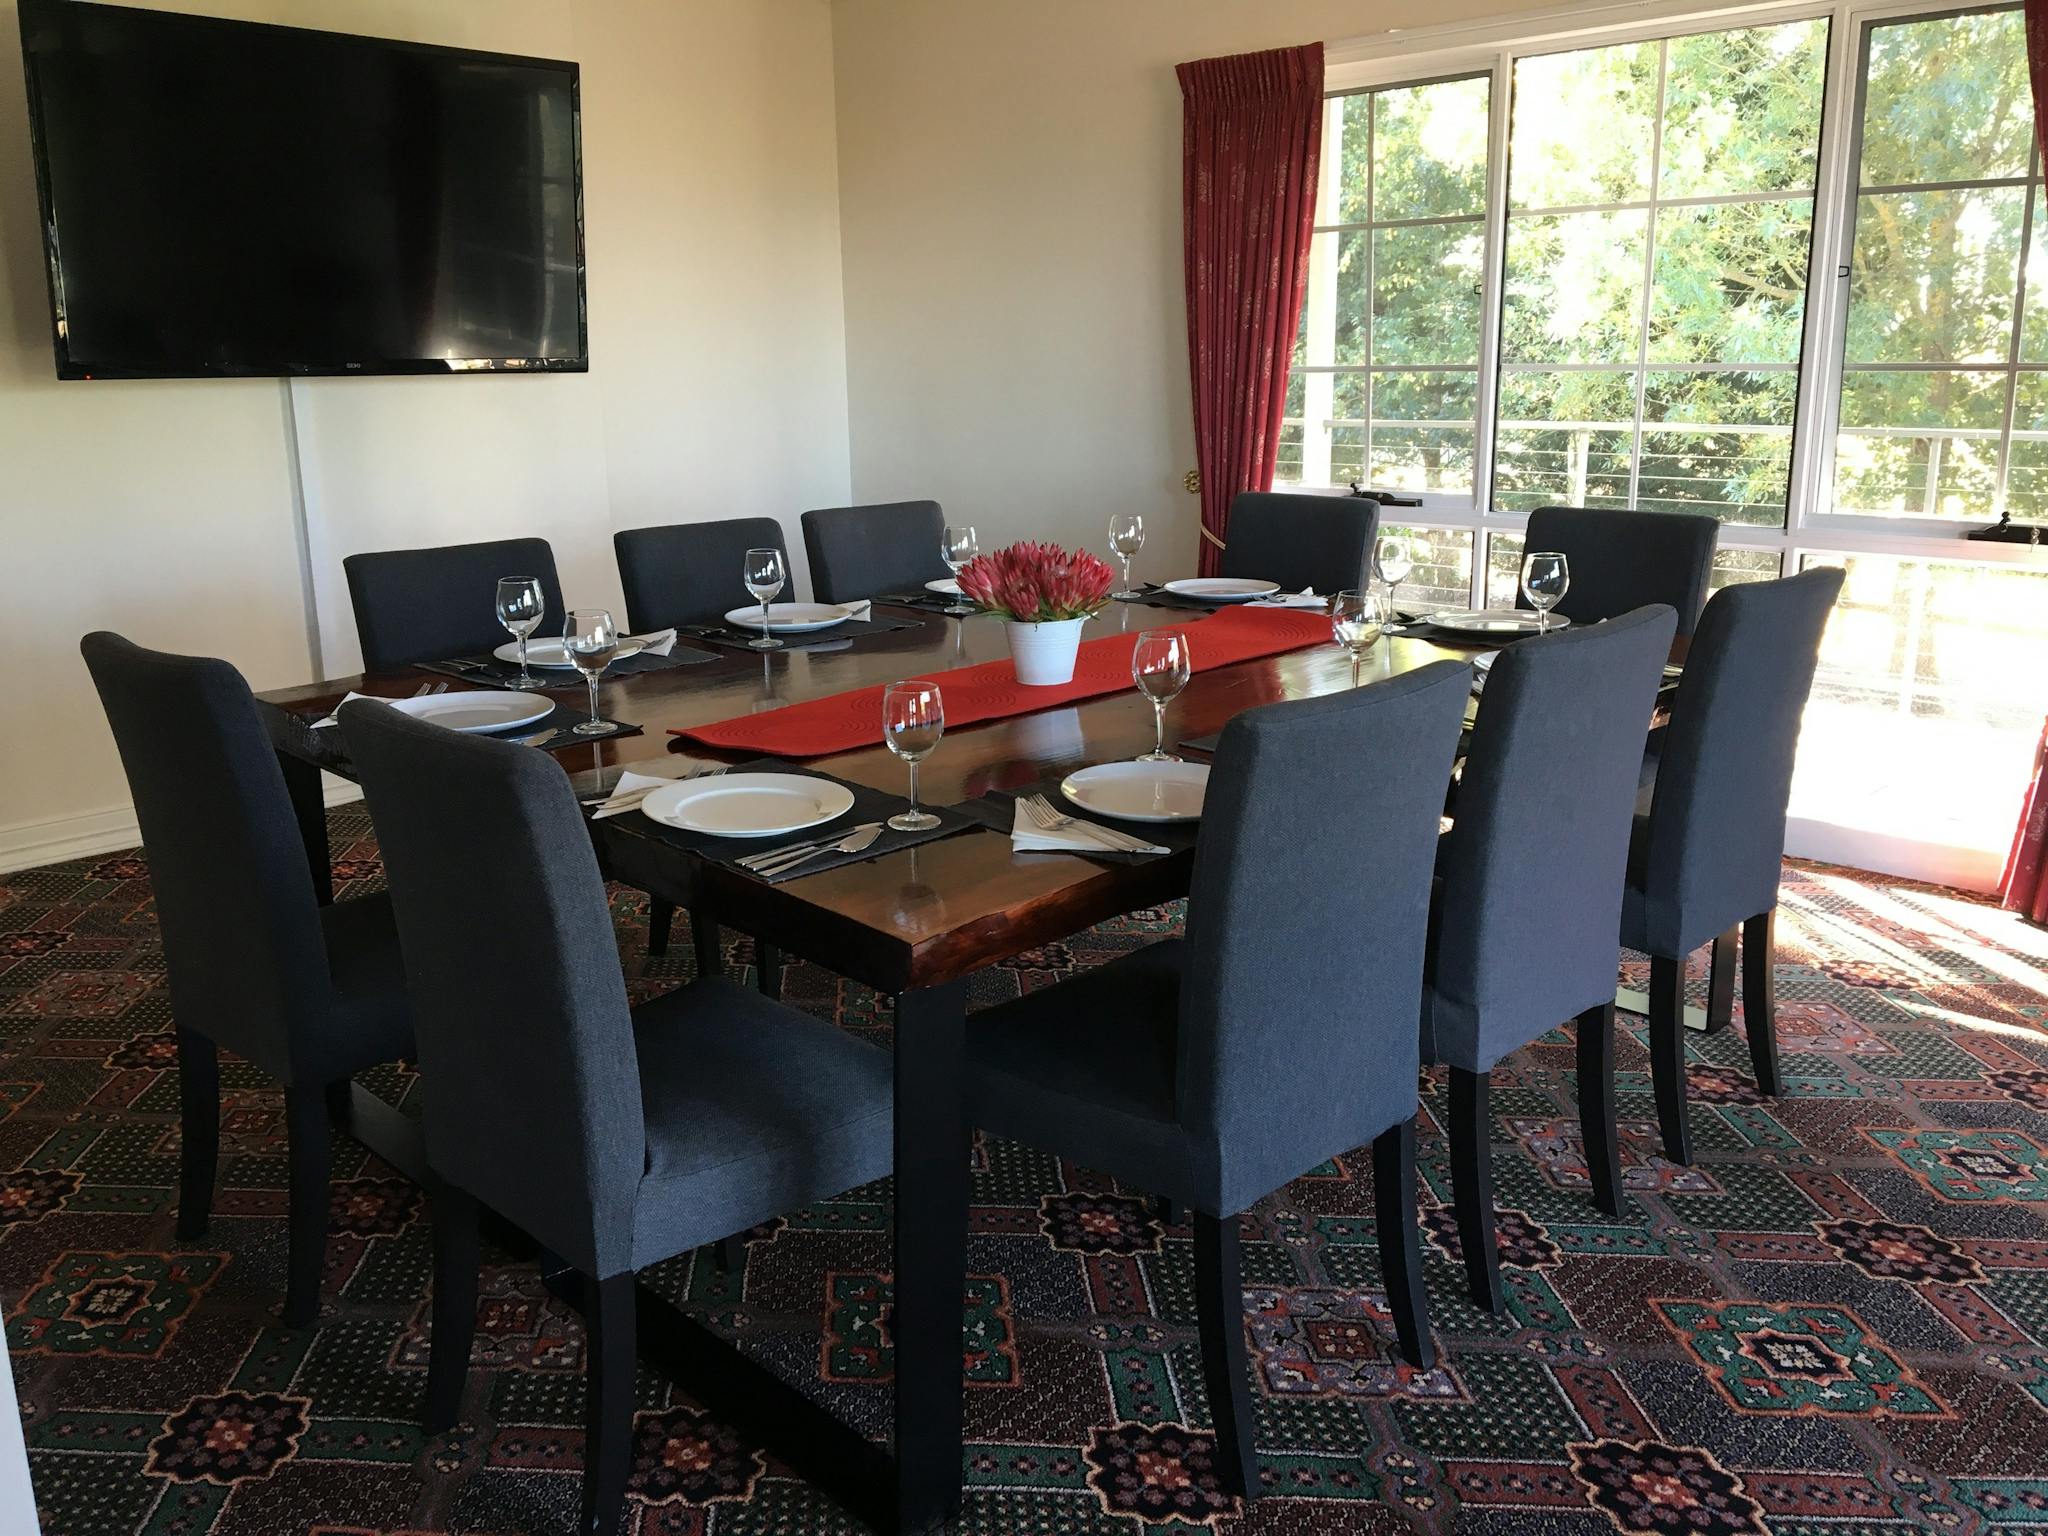 Table in the formal dining room